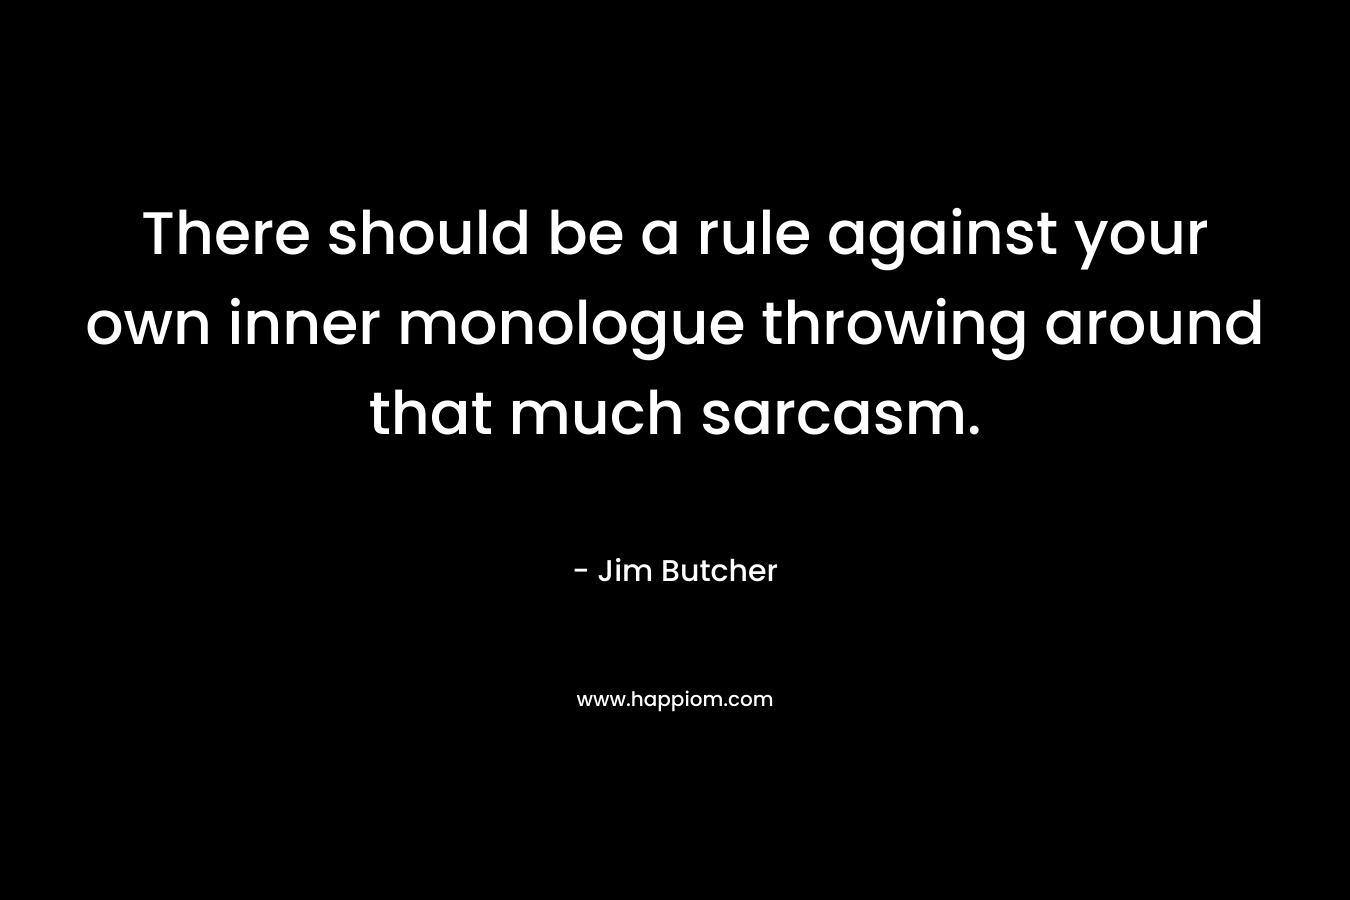 There should be a rule against your own inner monologue throwing around that much sarcasm. – Jim Butcher